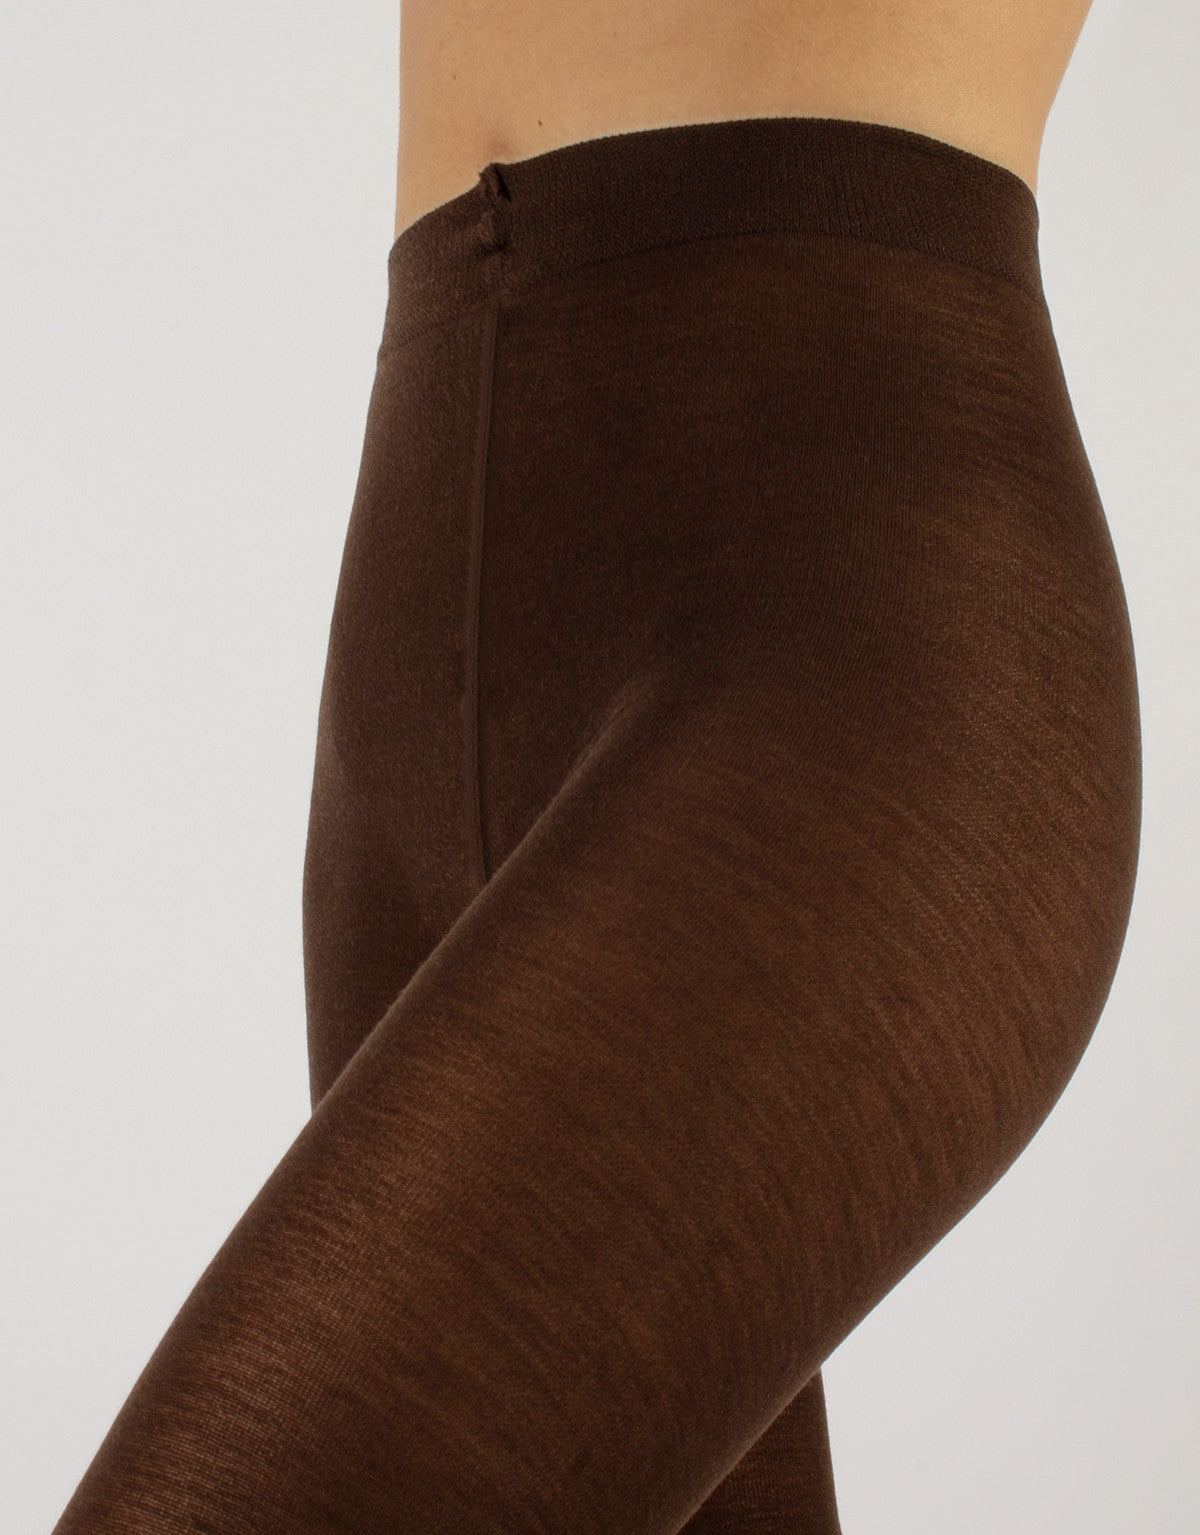 Calzitaly Dark Brown Merino Tights - Light and warm knitted thermal tights with deep waistband and gusset, perfect for cold Winters.